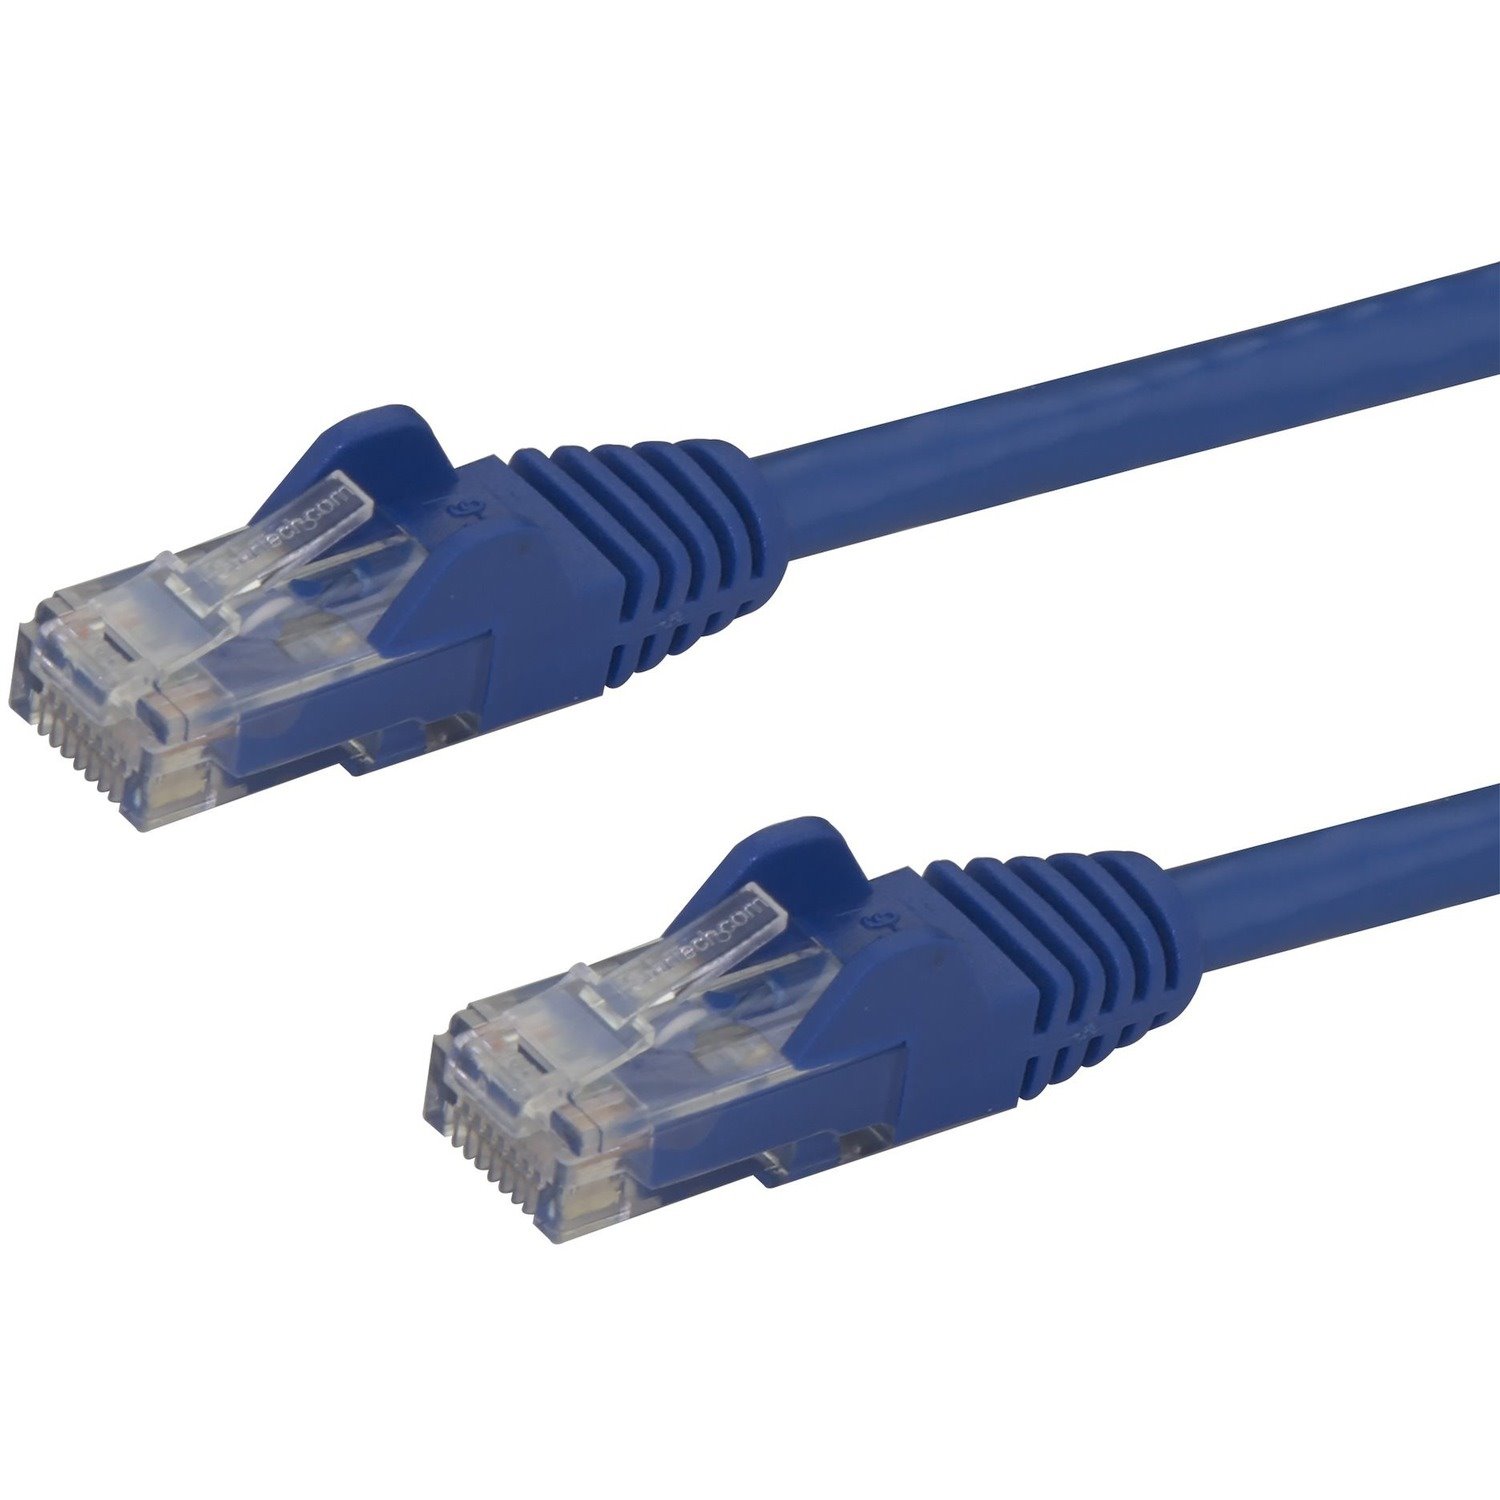 StarTech.com 7 m Category 6 Network Cable for Network Device, Wall Outlet, Workstation, Distribution Panel, Security Device, VoIP Device, Hub - 1